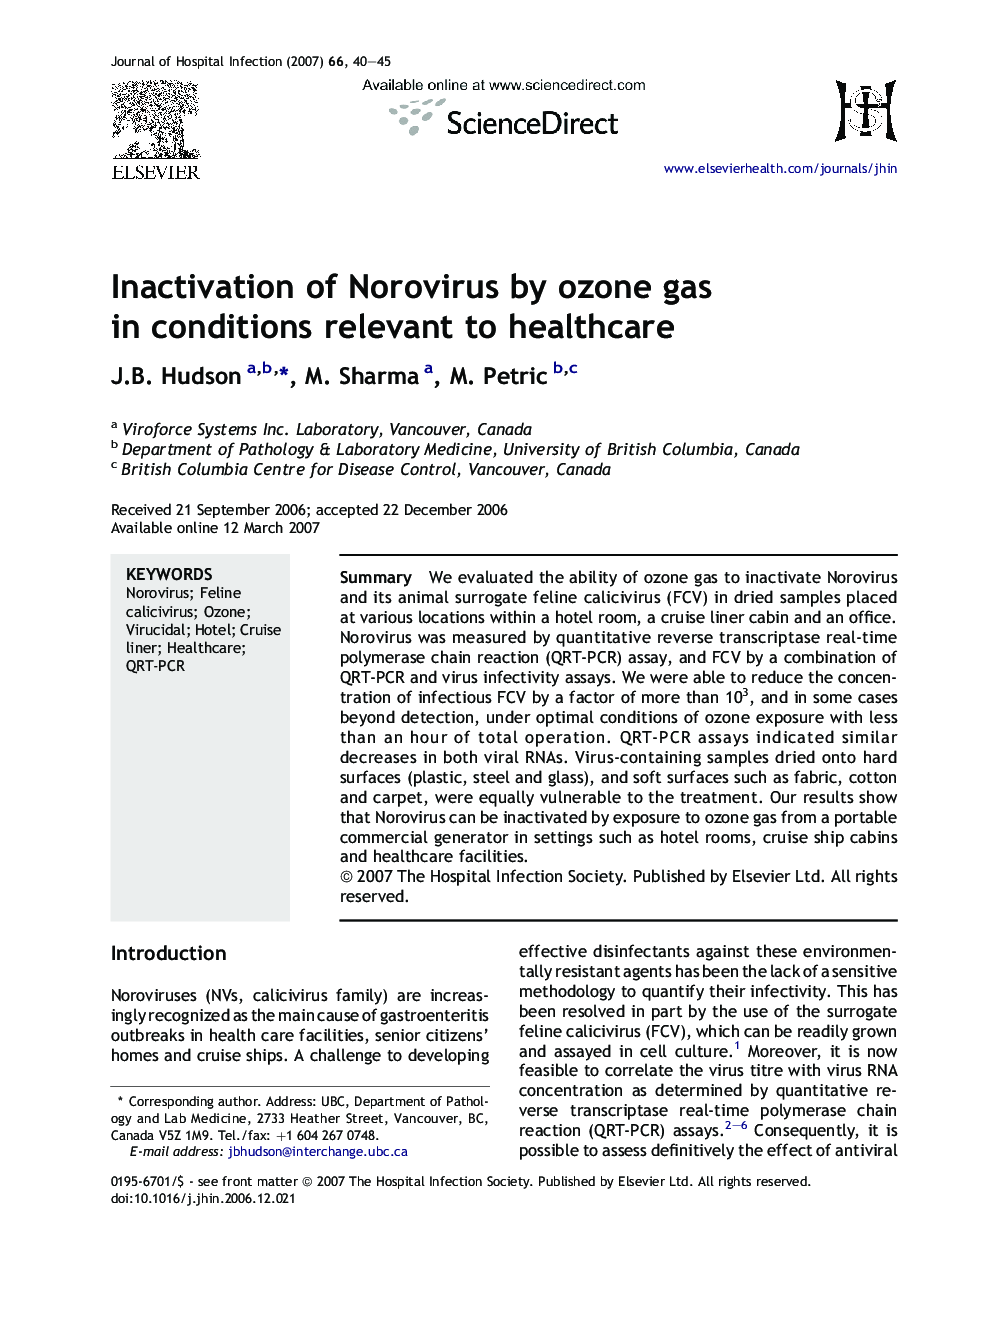 Inactivation of Norovirus by ozone gas in conditions relevant to healthcare